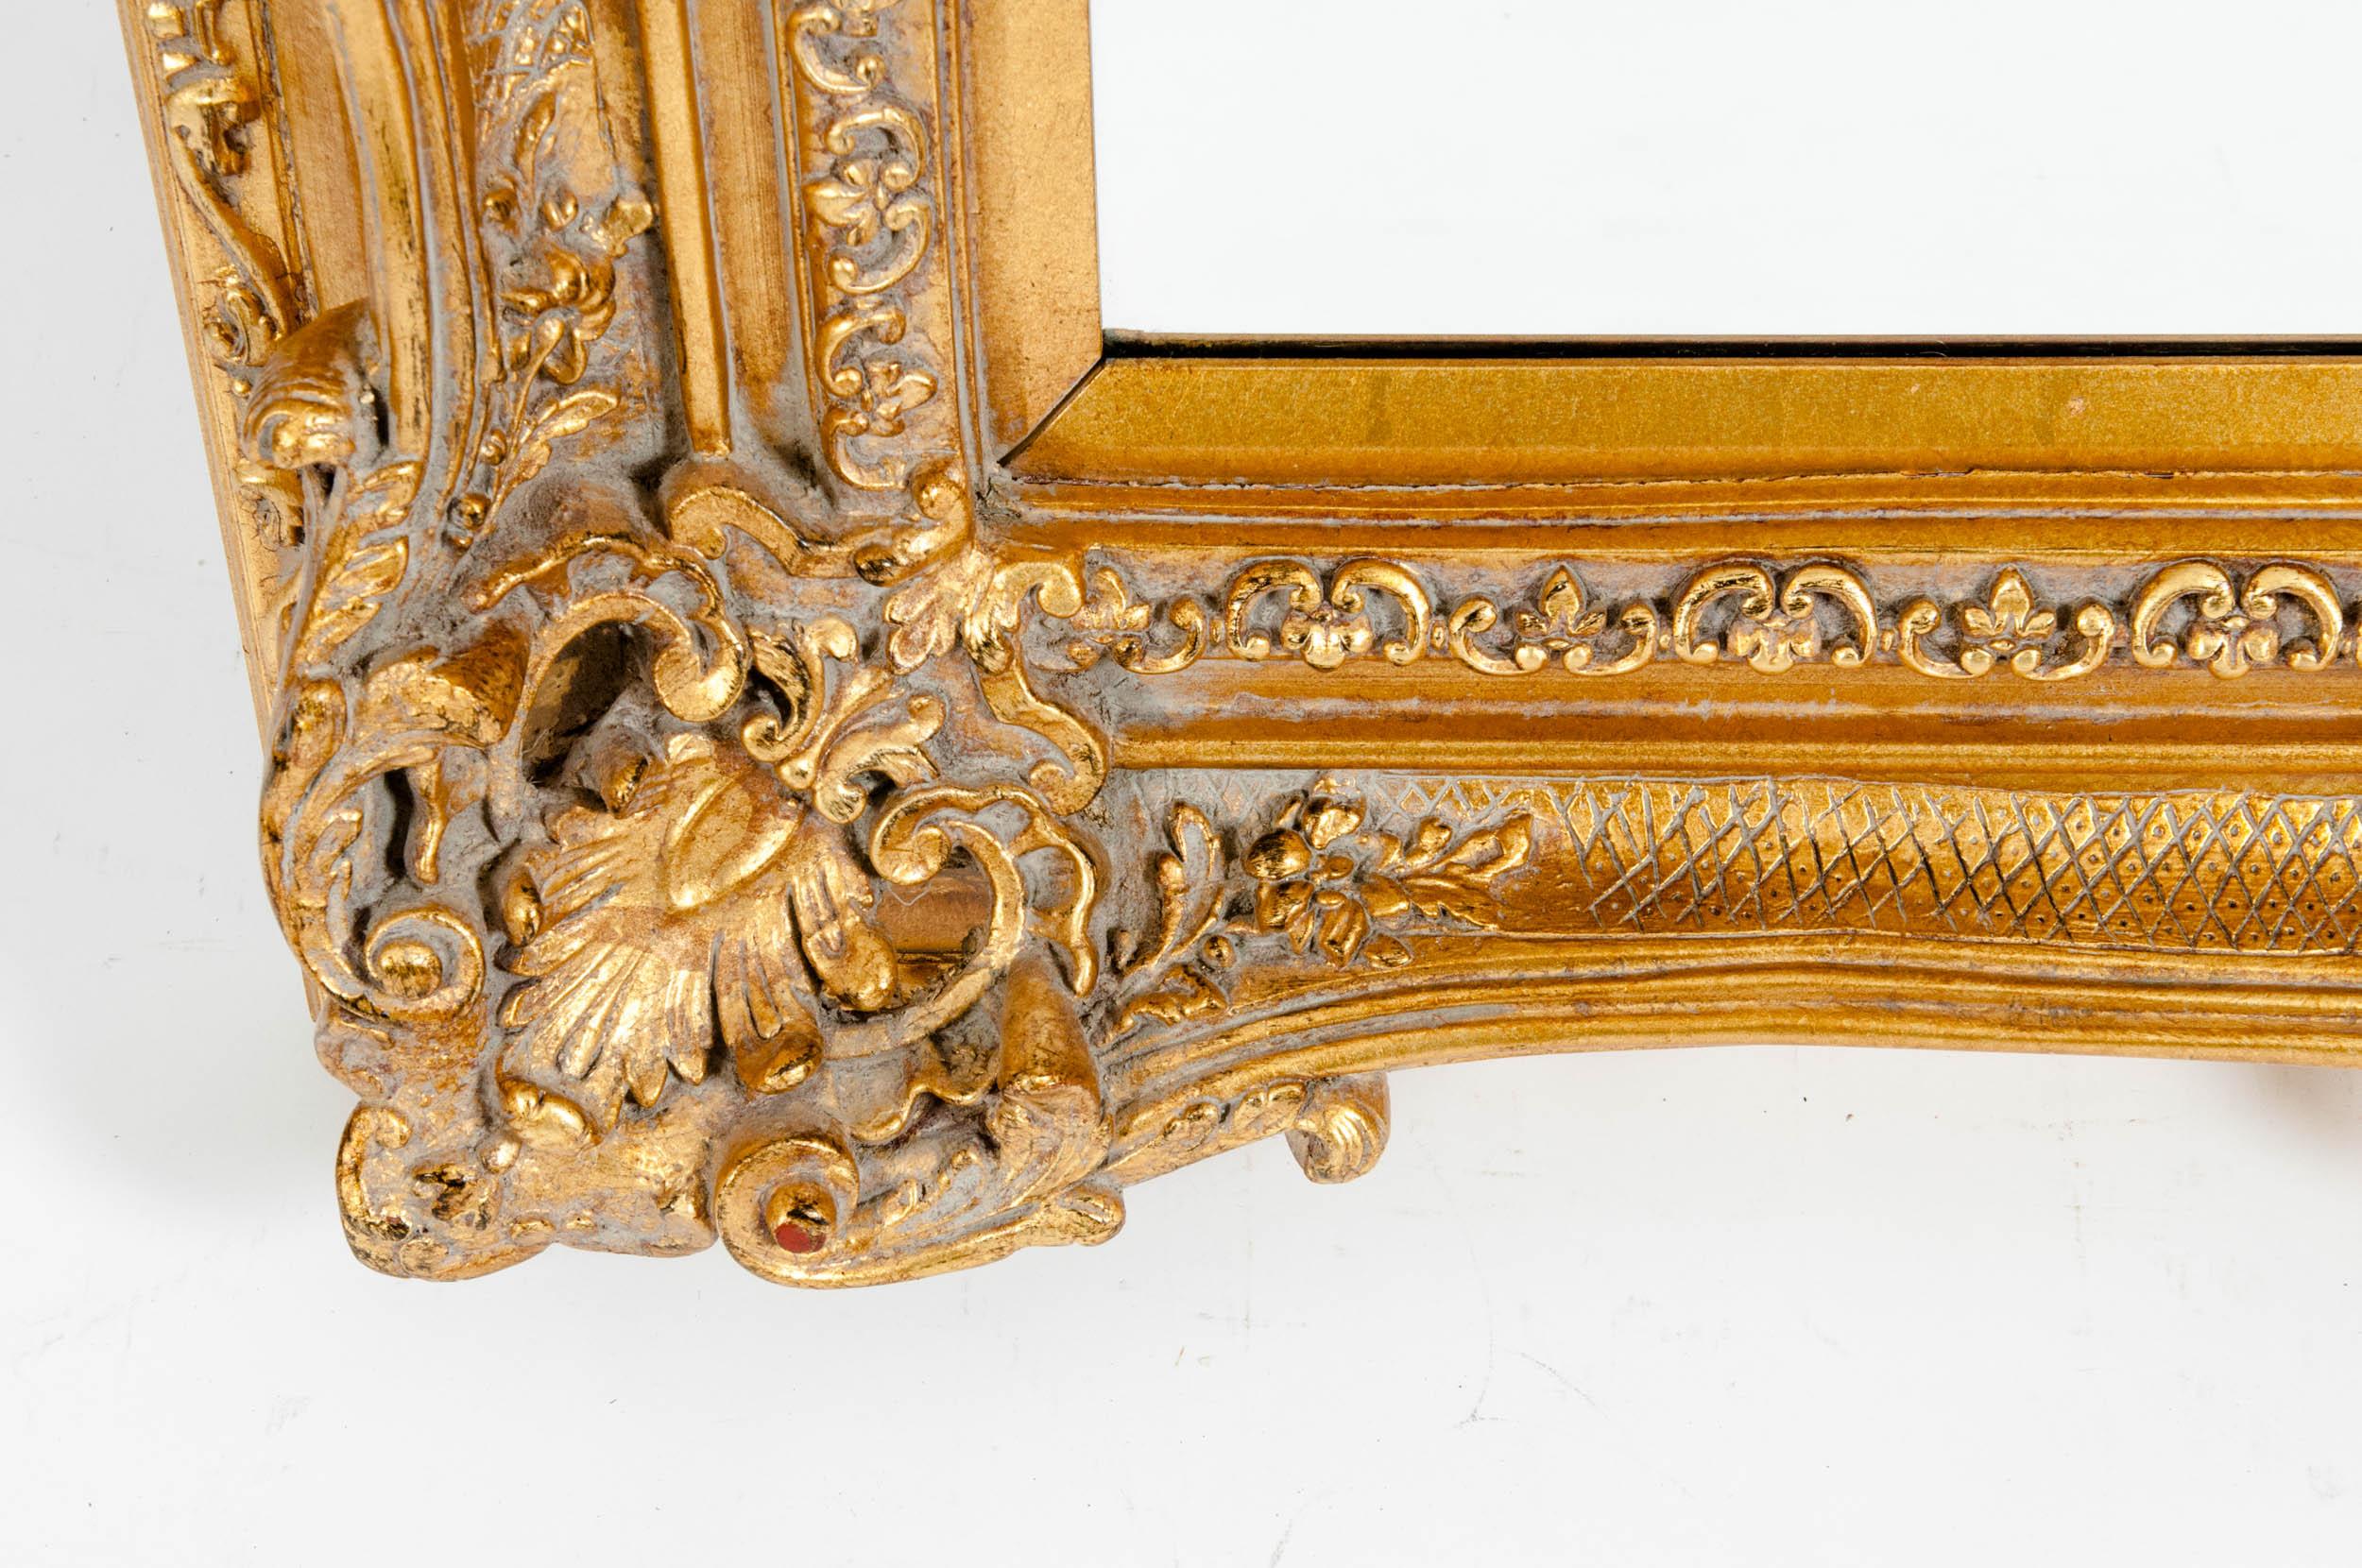 Mid-20th century ornately giltwood frame bevelled mantel hanging wall mirror. The mirror is in excellent condition with appropriate wear consistent with age and use. The wall mirror measure about 49 inches length x 37 inches wide x 5 inches deep.